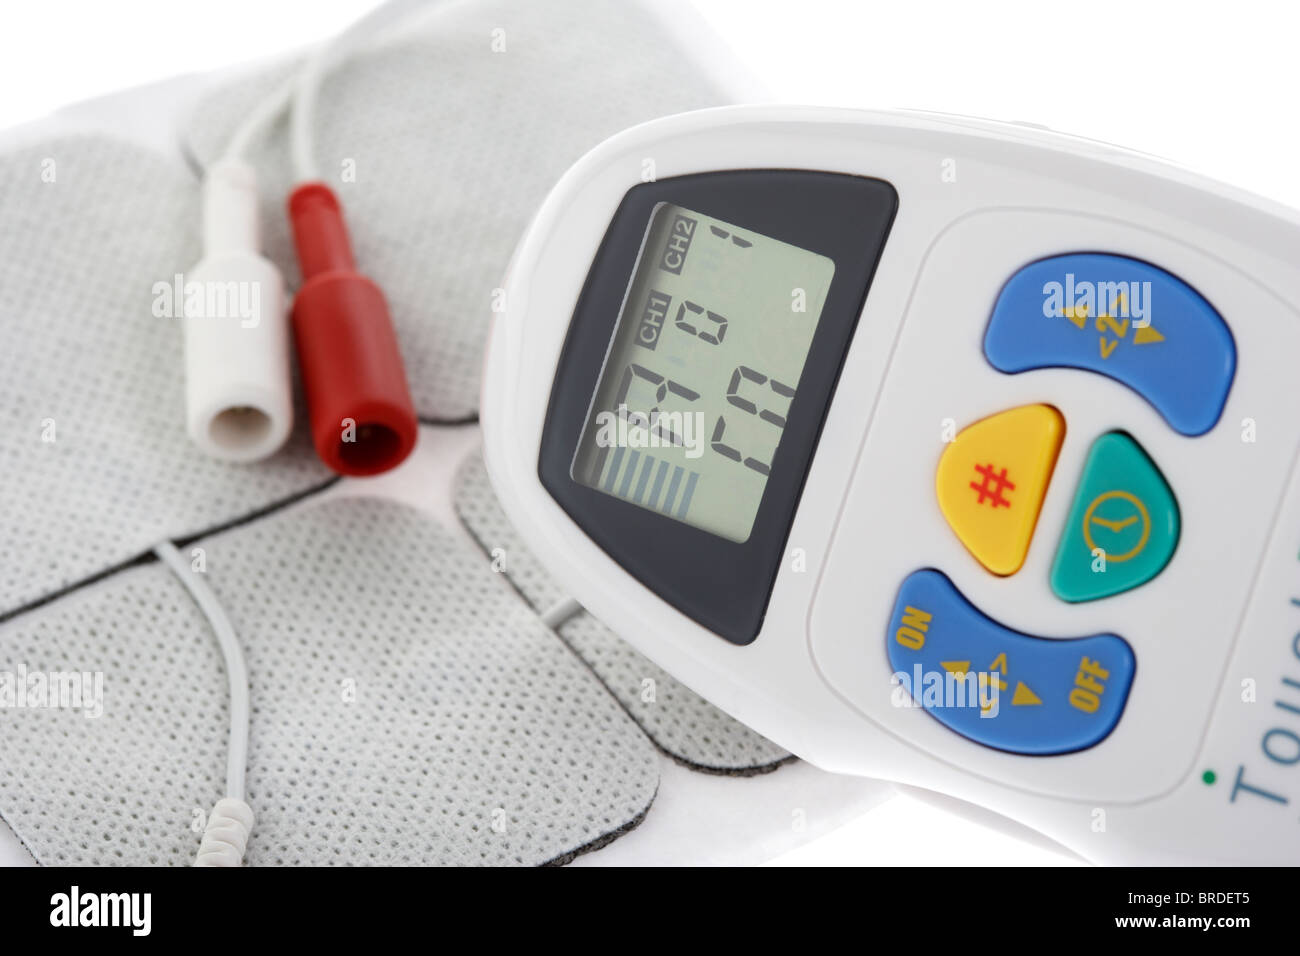 dual channel tens machine for pain relief Stock Photo